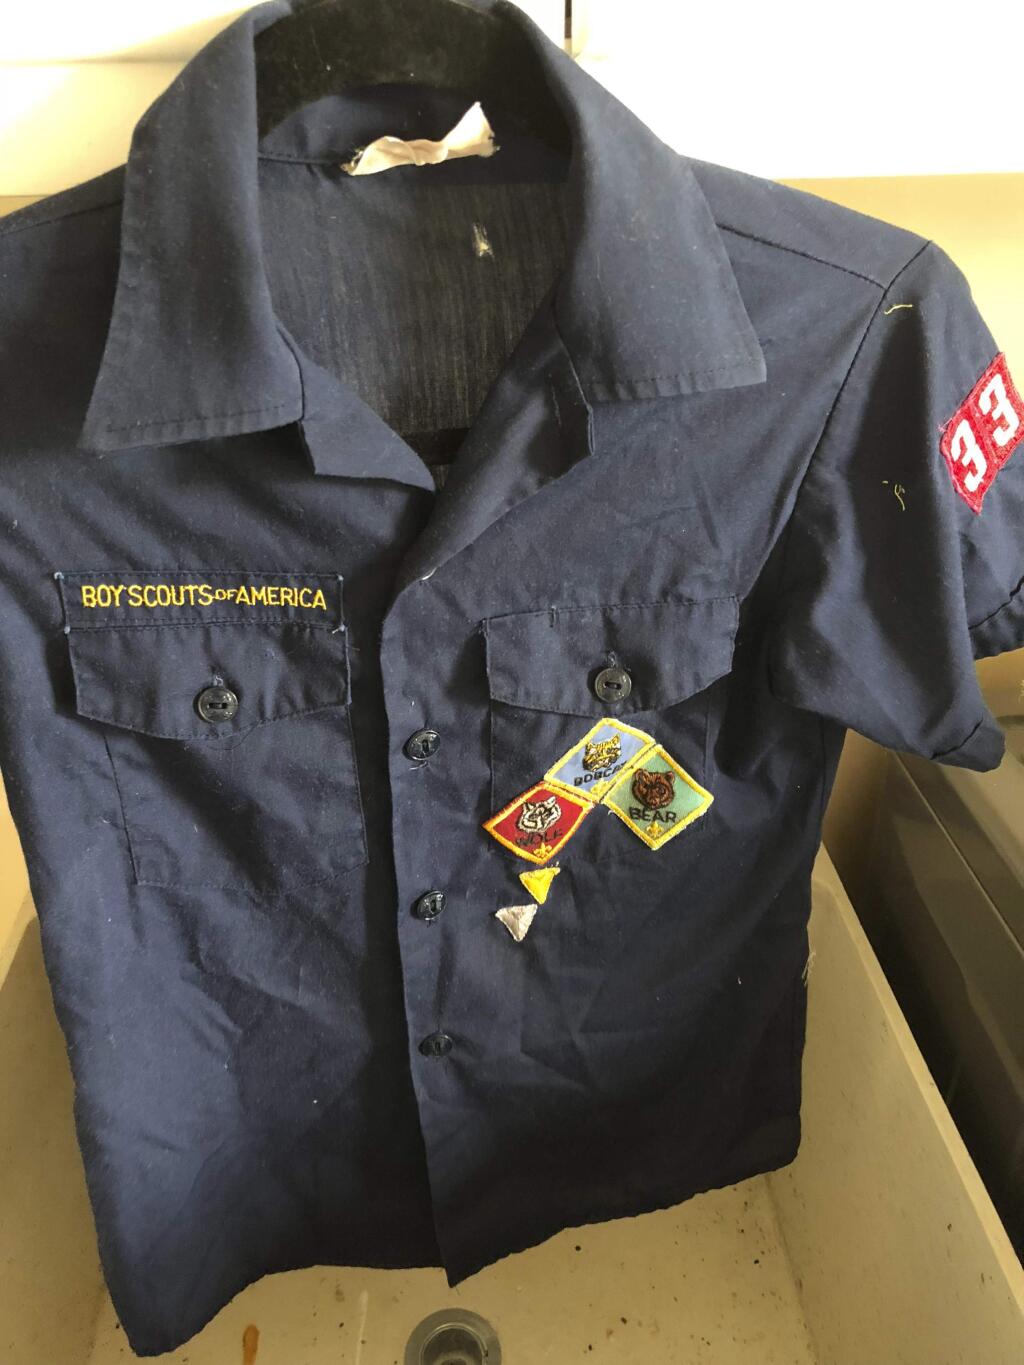 This Feb. 13, 2018, photo provided by Erin Doherty shows the Boy Scout uniform of a Montecito, Calif., mudslide victim, believed to be dead, after Doherty found and cleaned it before giving it to the boy's mother. Months after the mudslides nearly wiped the small community of Montecito off the map and killed multiple people, those who survived are still looking for and finding their belongings in the deep and hardened sludge. (Erin Doherty via AP)